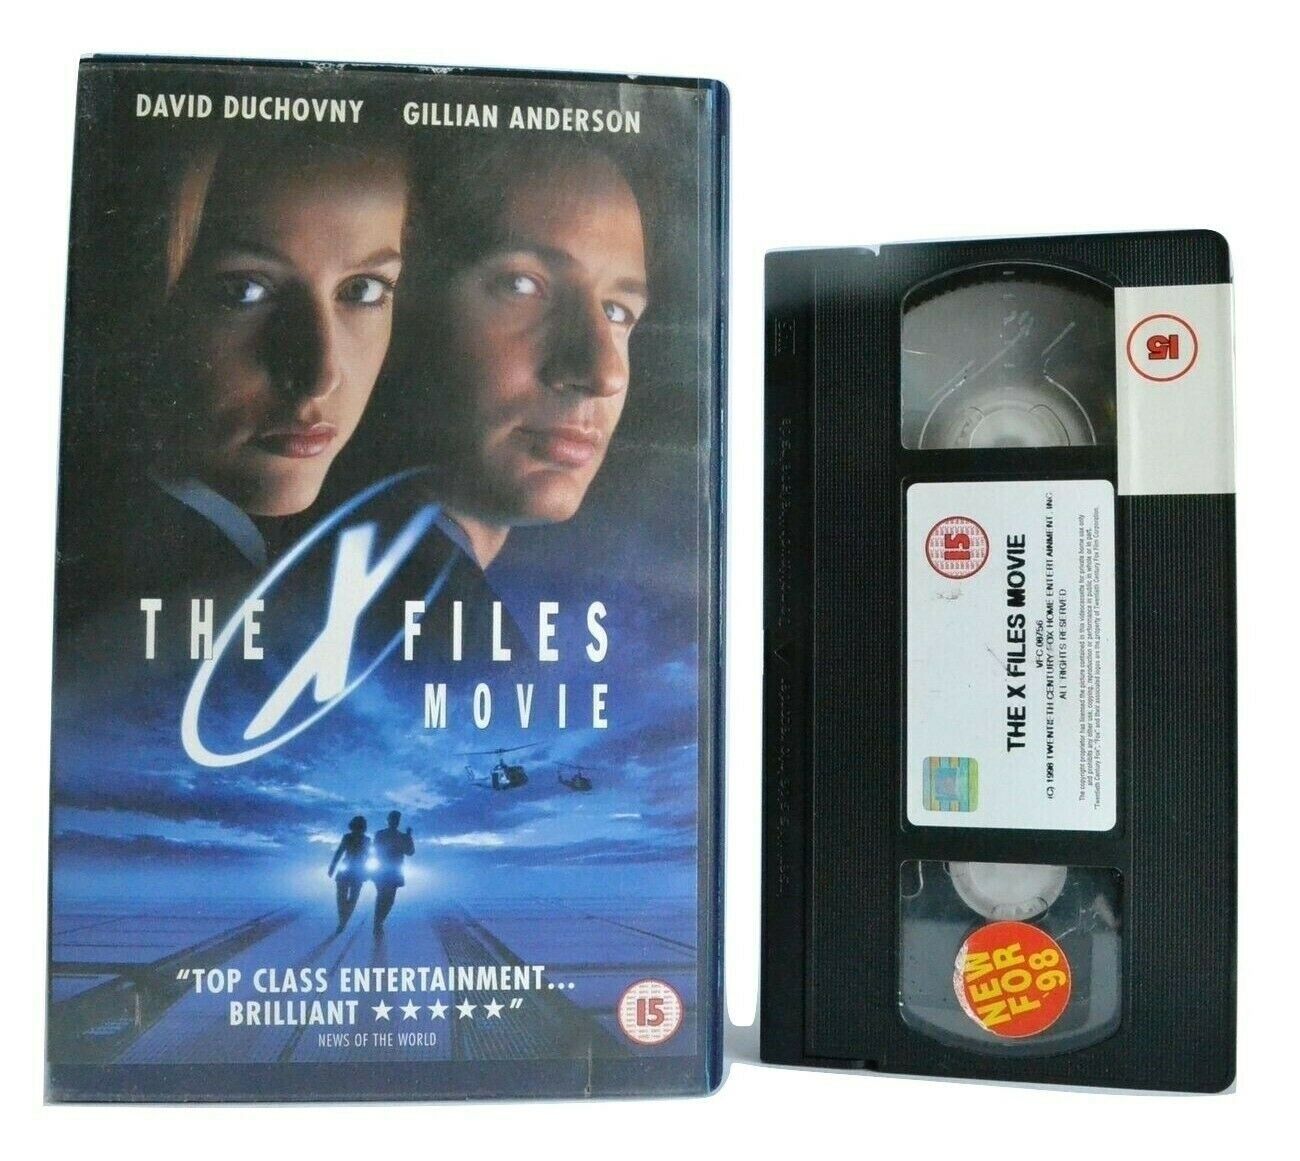 The X-Files Movie (1998): Sci-Fi Thriller - Large Box - David Duchovny - Pal VHS-